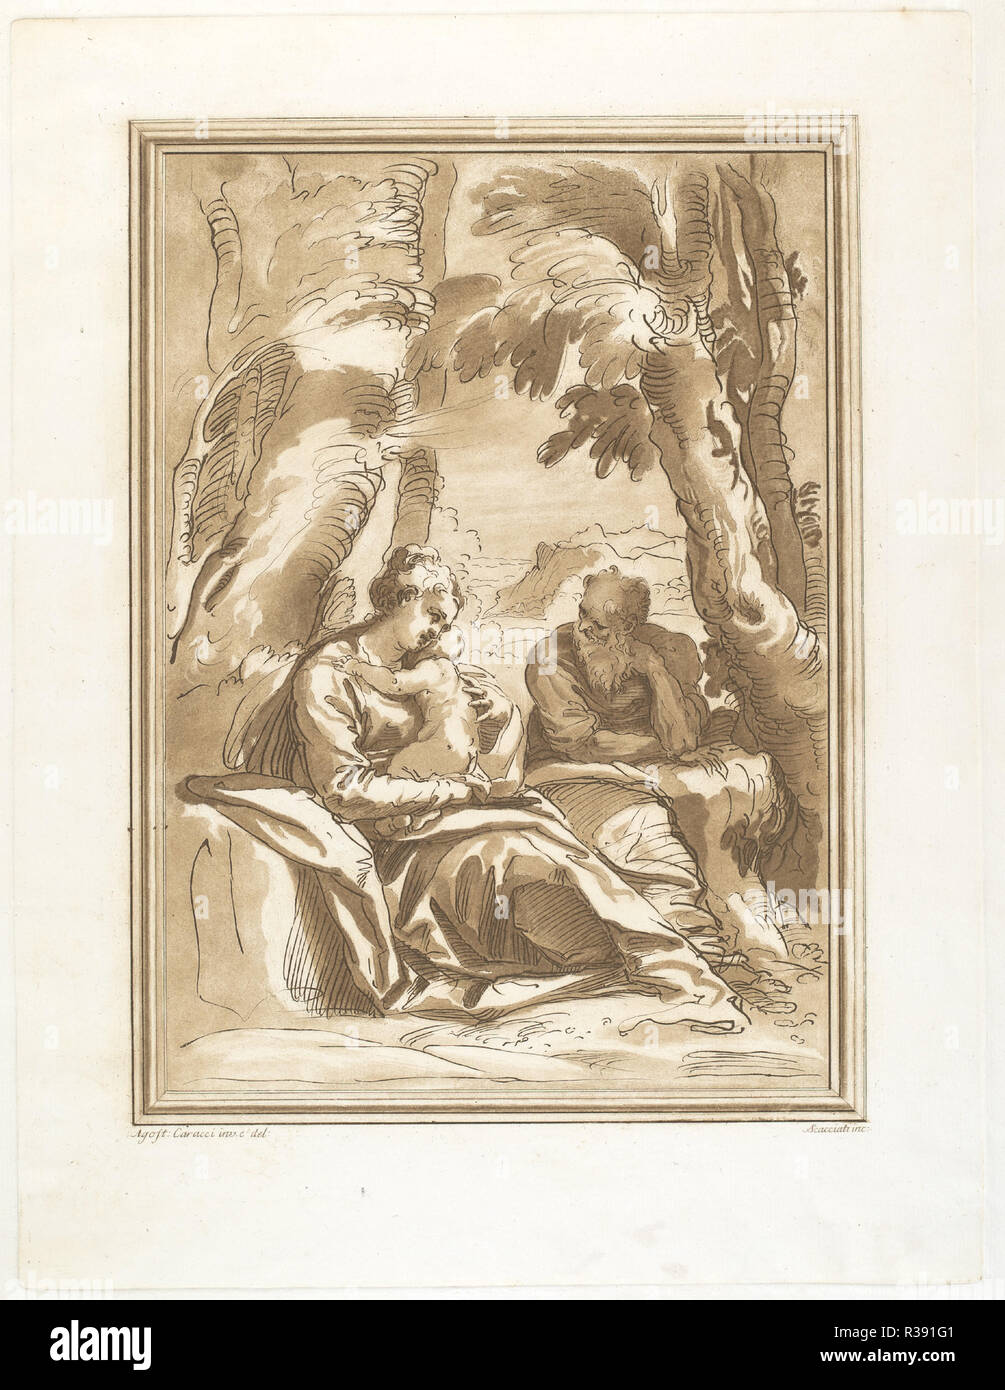 Rest on the Flight into Egypt. Dated: c. 1766. Dimensions: sheet: 61.5 × 44.5 cm (24 3/16 × 17 1/2 in.)  plate: 49.5 × 37.7 cm (19 1/2 × 14 13/16 in.). Medium: etching printed in brown with stipple engraving and sulfur-tint. Museum: National Gallery of Art, Washington DC. Author: Andrea Scacciati after Agostino Carracci. Stock Photo